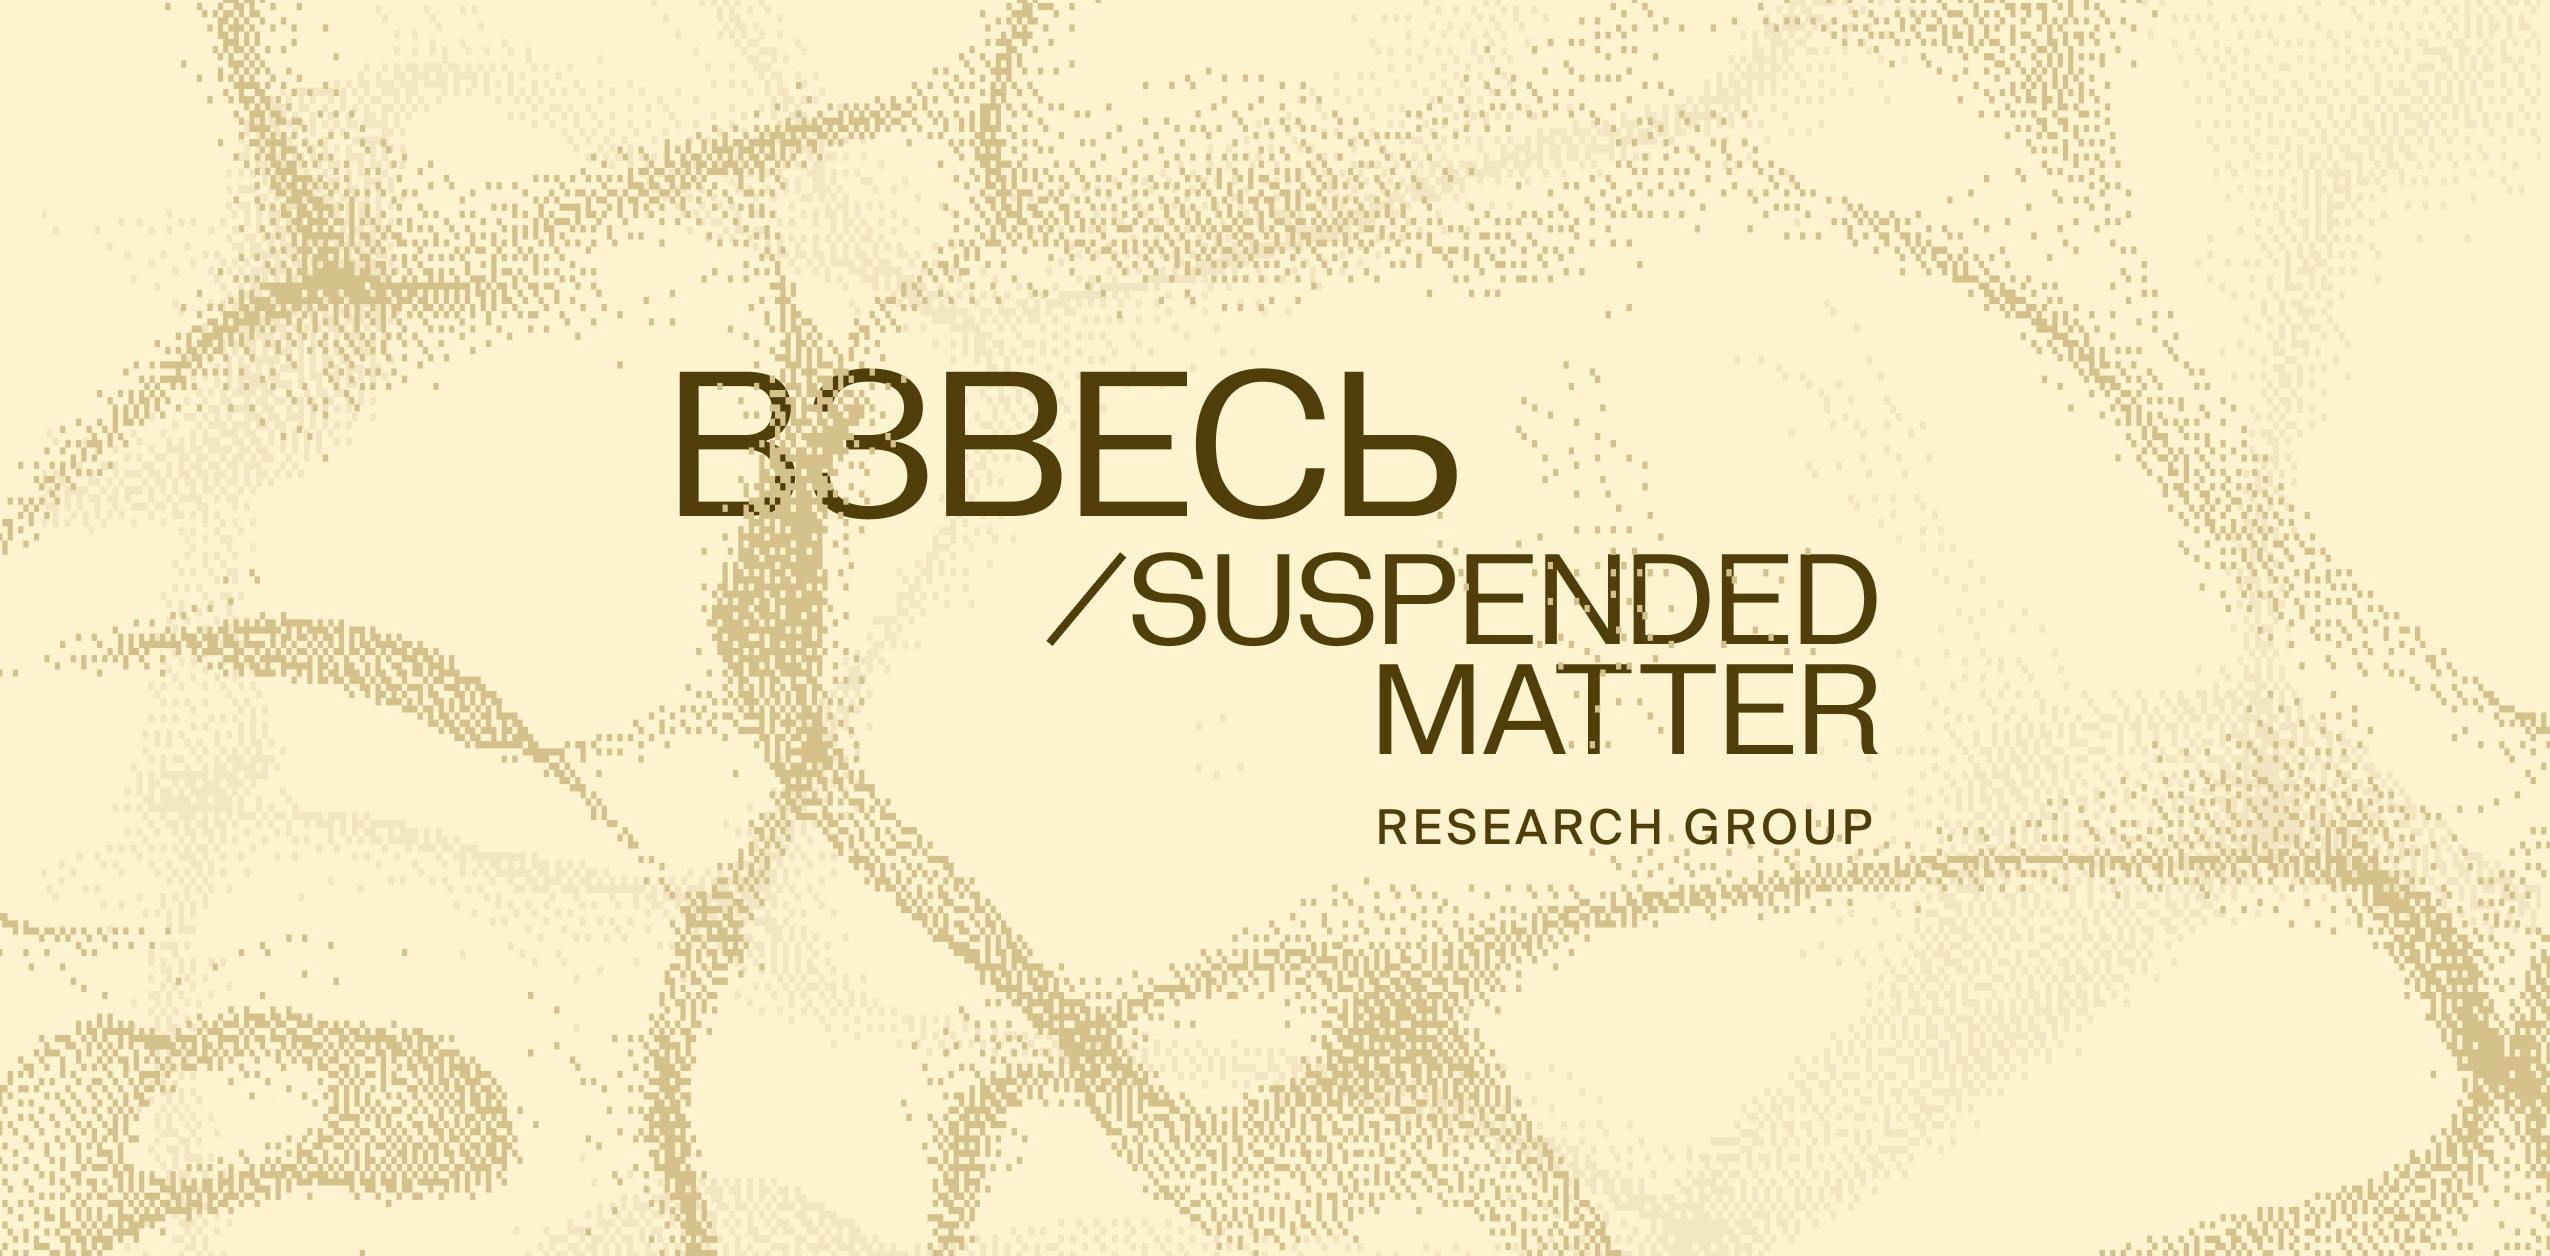 Open call for participation in a research group ВЗВЕСЬ / SUSPENDED MATTER